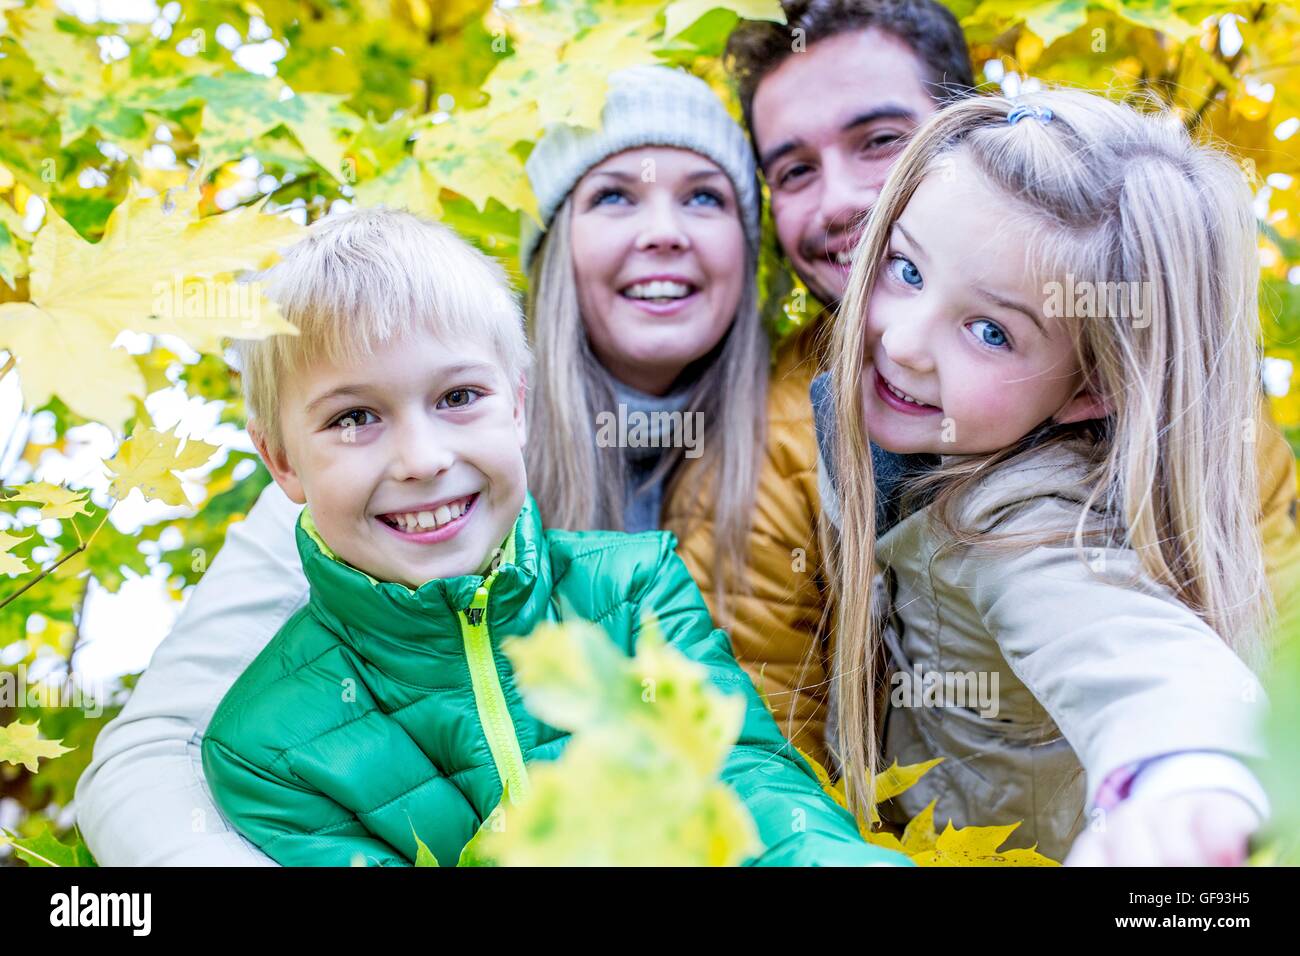 MODEL RELEASED. Family smiling together while surrounded by autumn leaves. Stock Photo